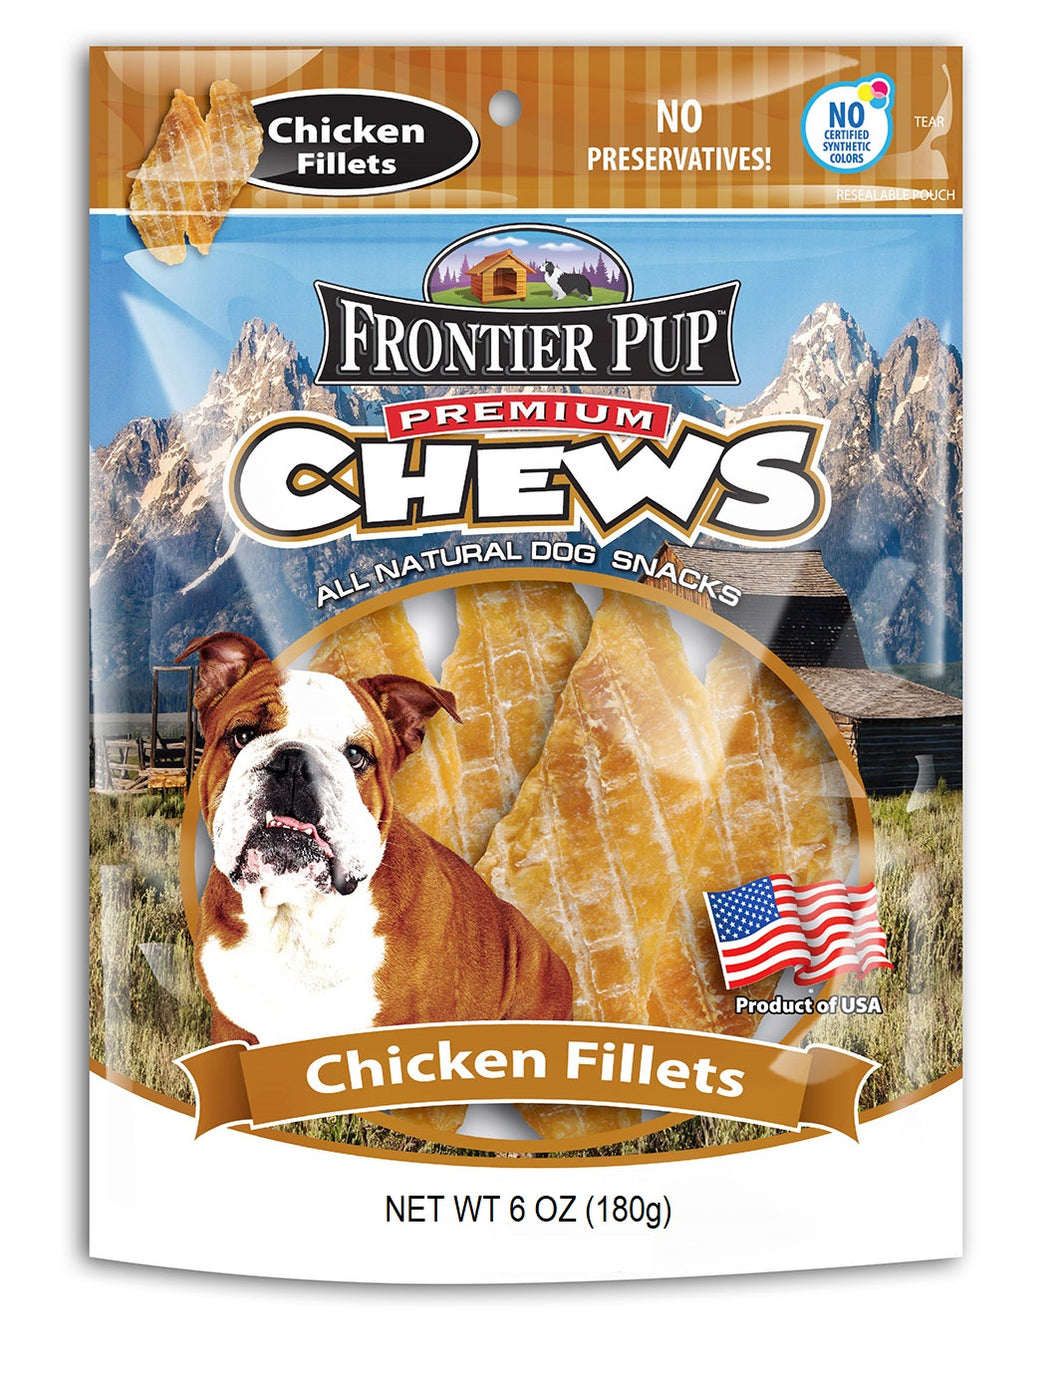 Frontier Pup Chews Made In The USA Chicken Breast Fillets, 6 oz